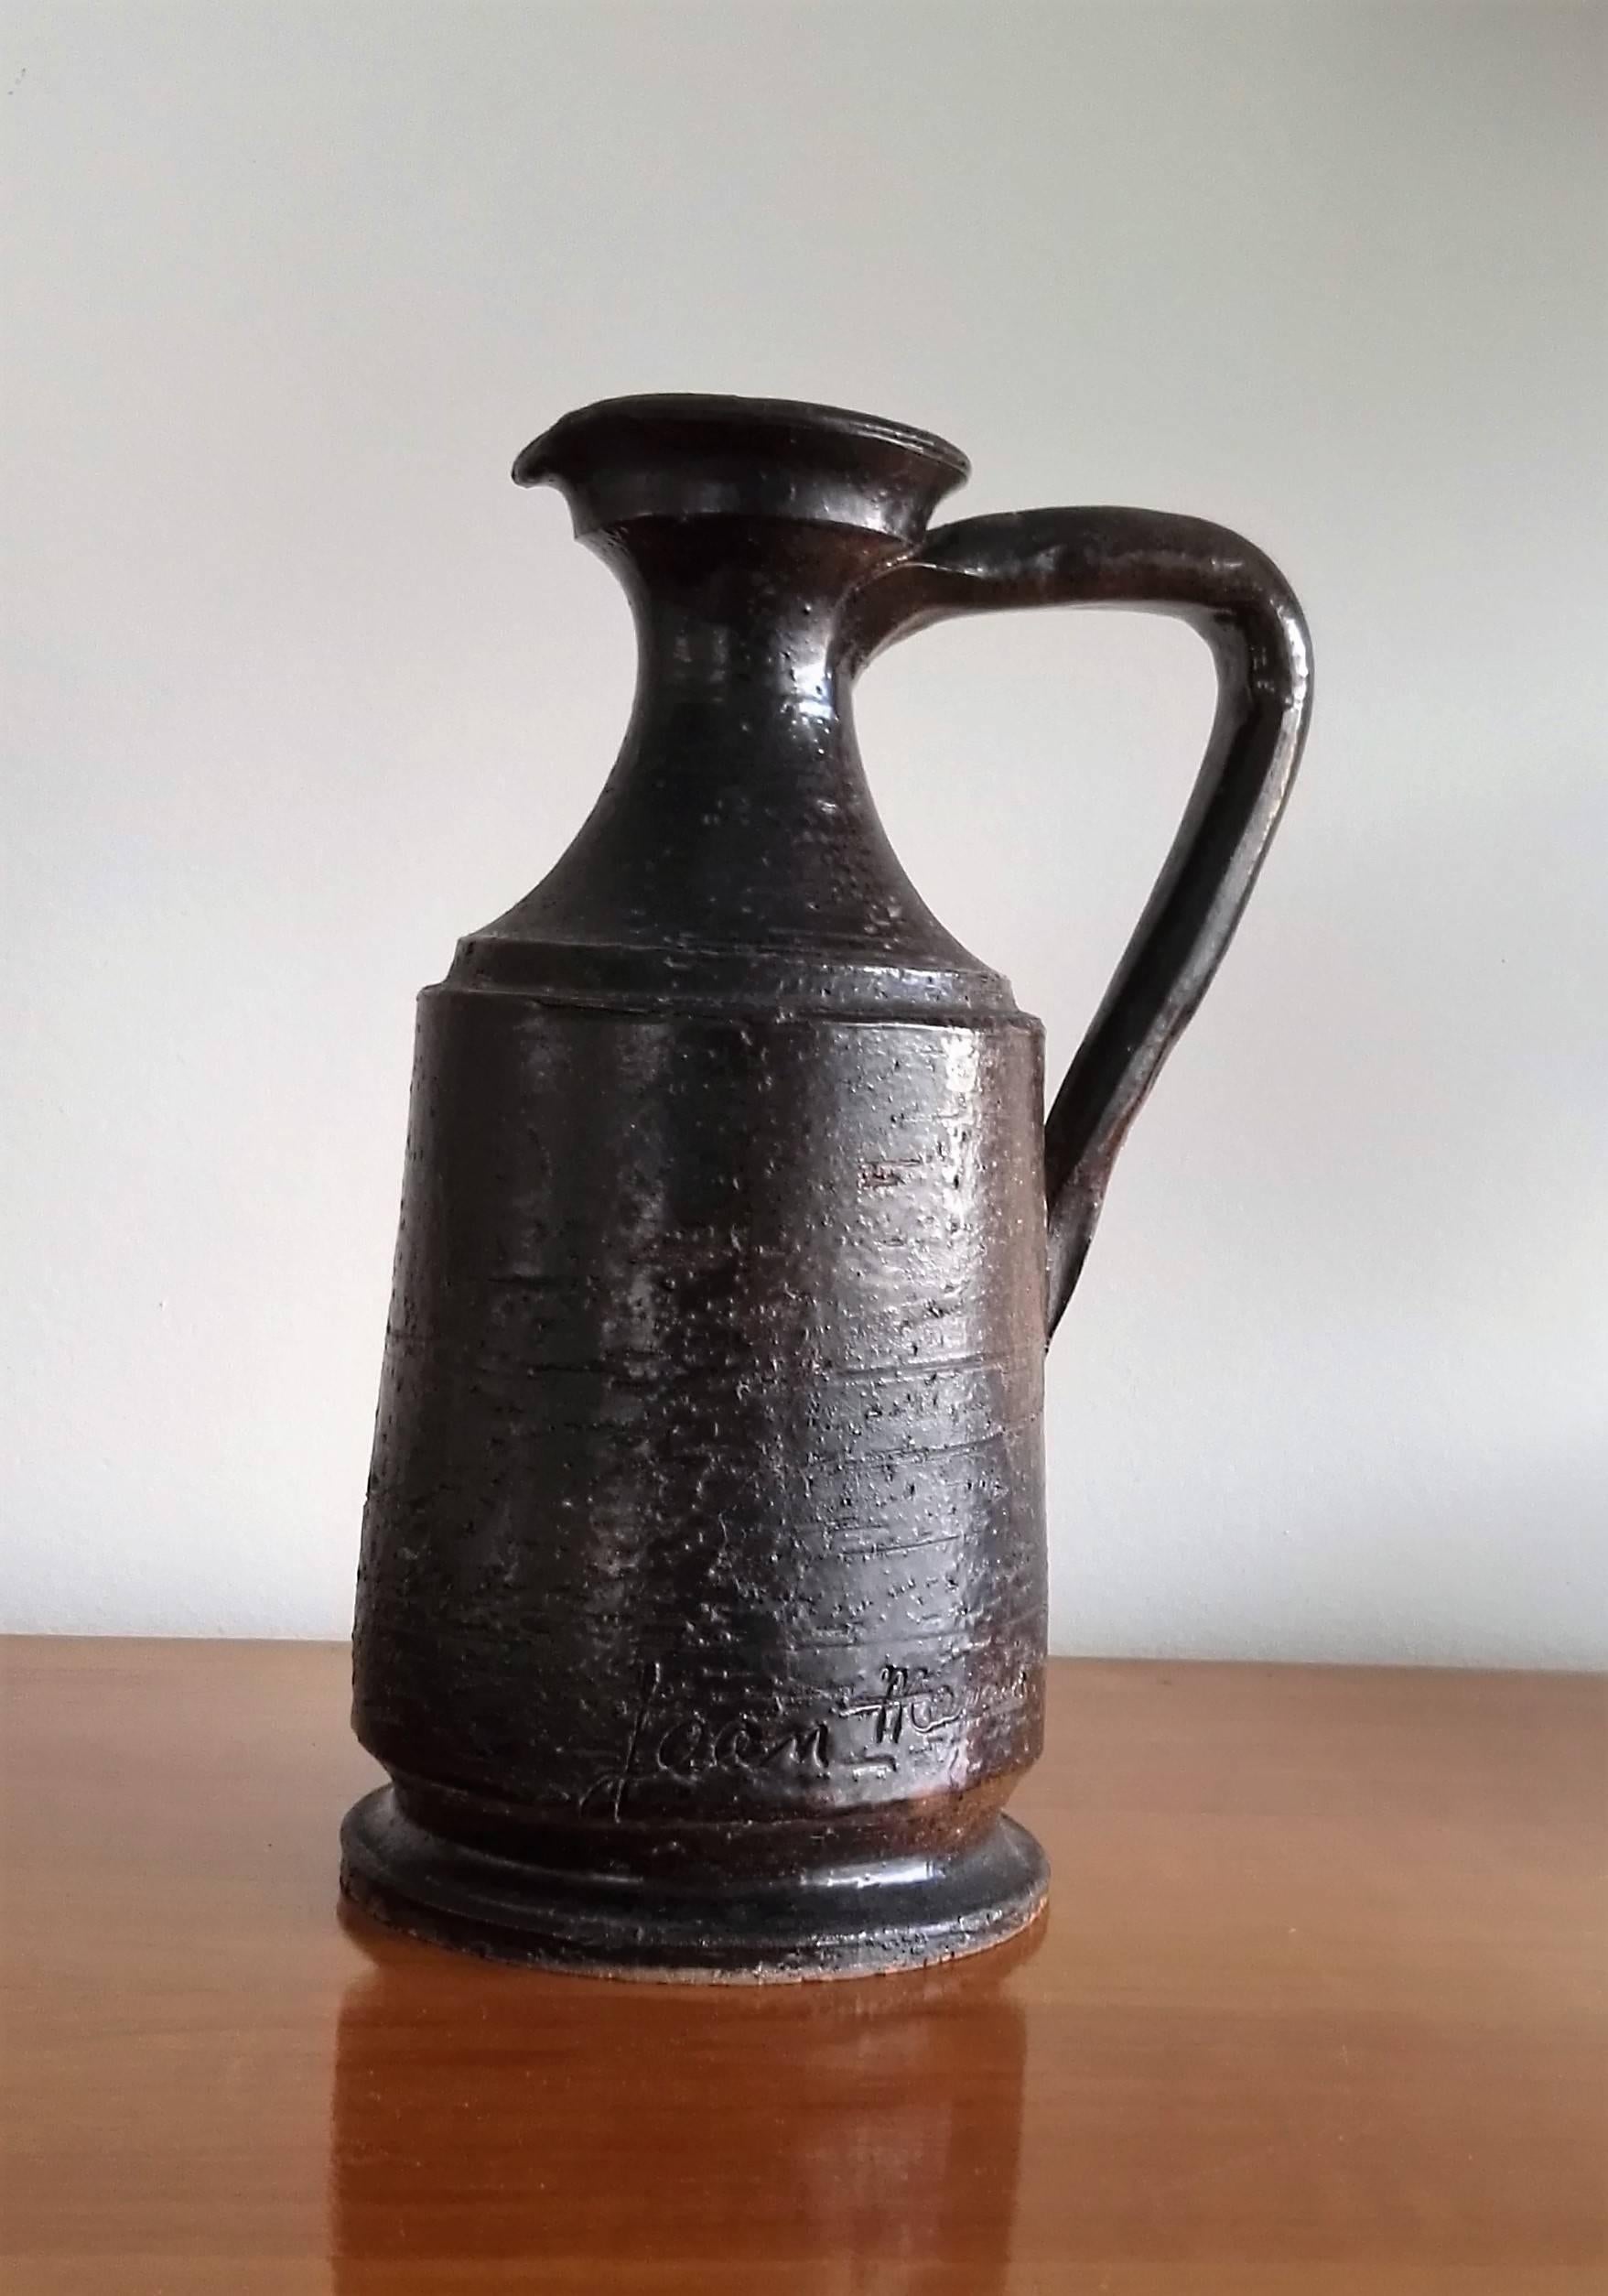 Black coated ceramic vase or pitcher elegant vase by French actor and Jean Cocteau's partner Jean Marais.
Very good vintage condition.
This item will ship from France.
Price does not include handling, shipping and possible customs related